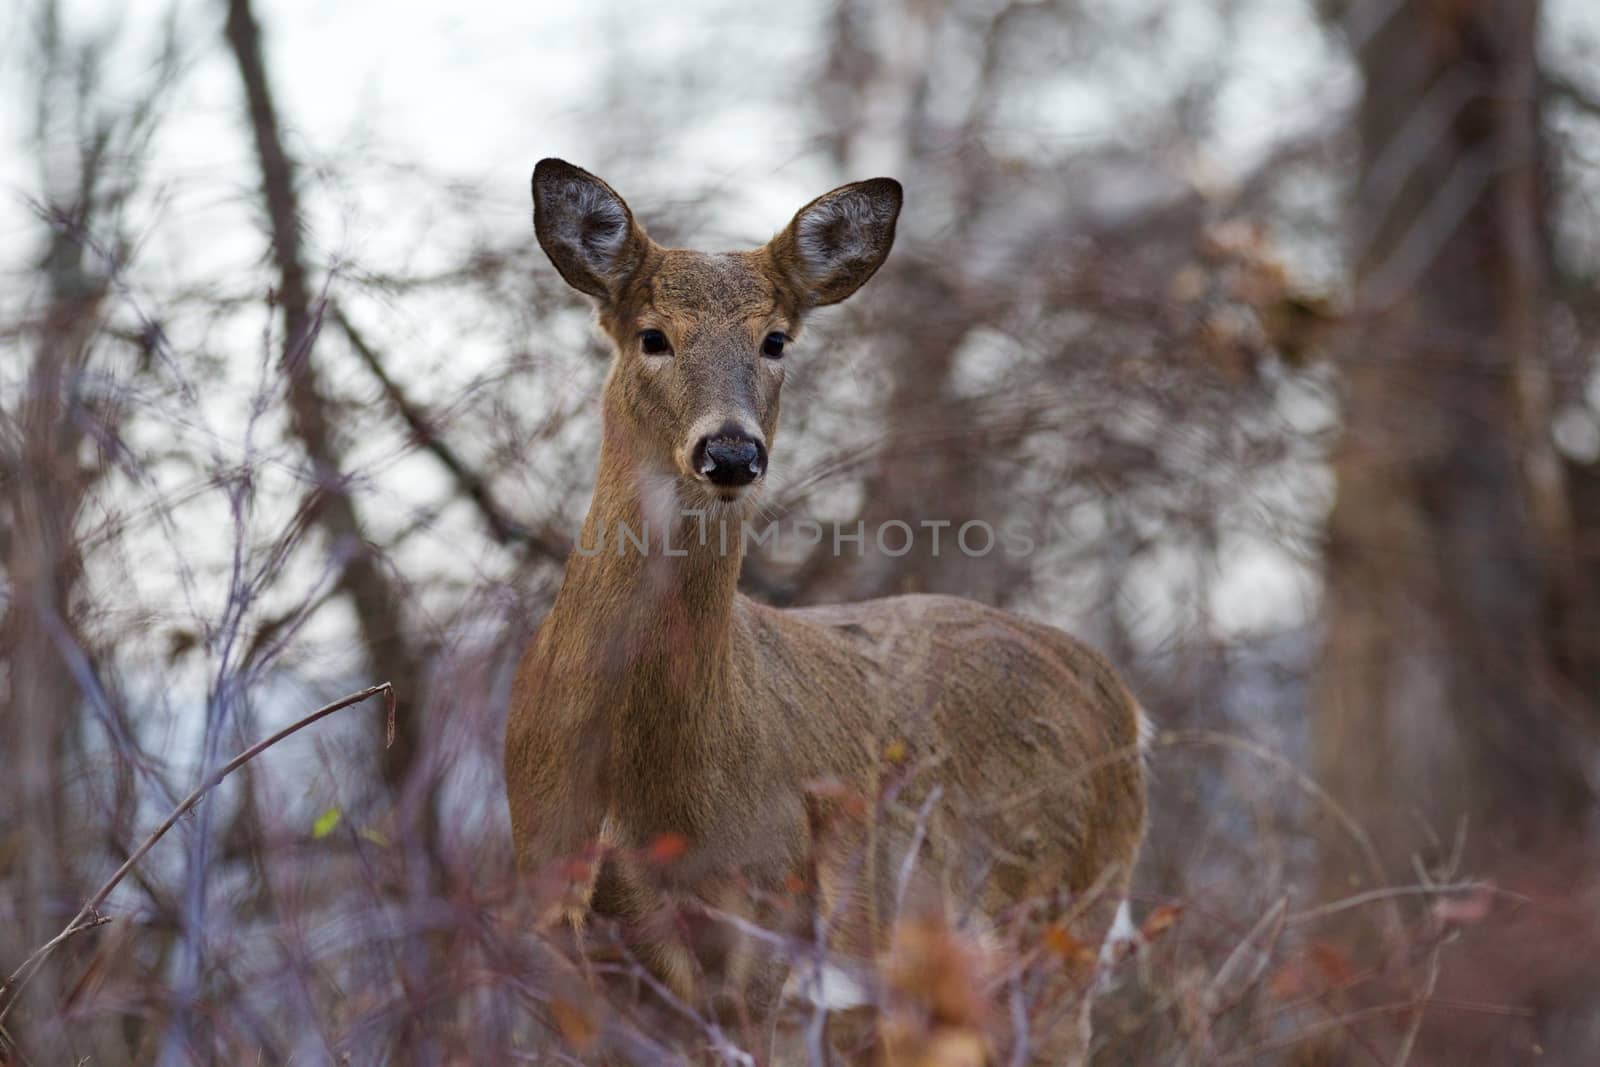 Image with the wide awake deer in the bush